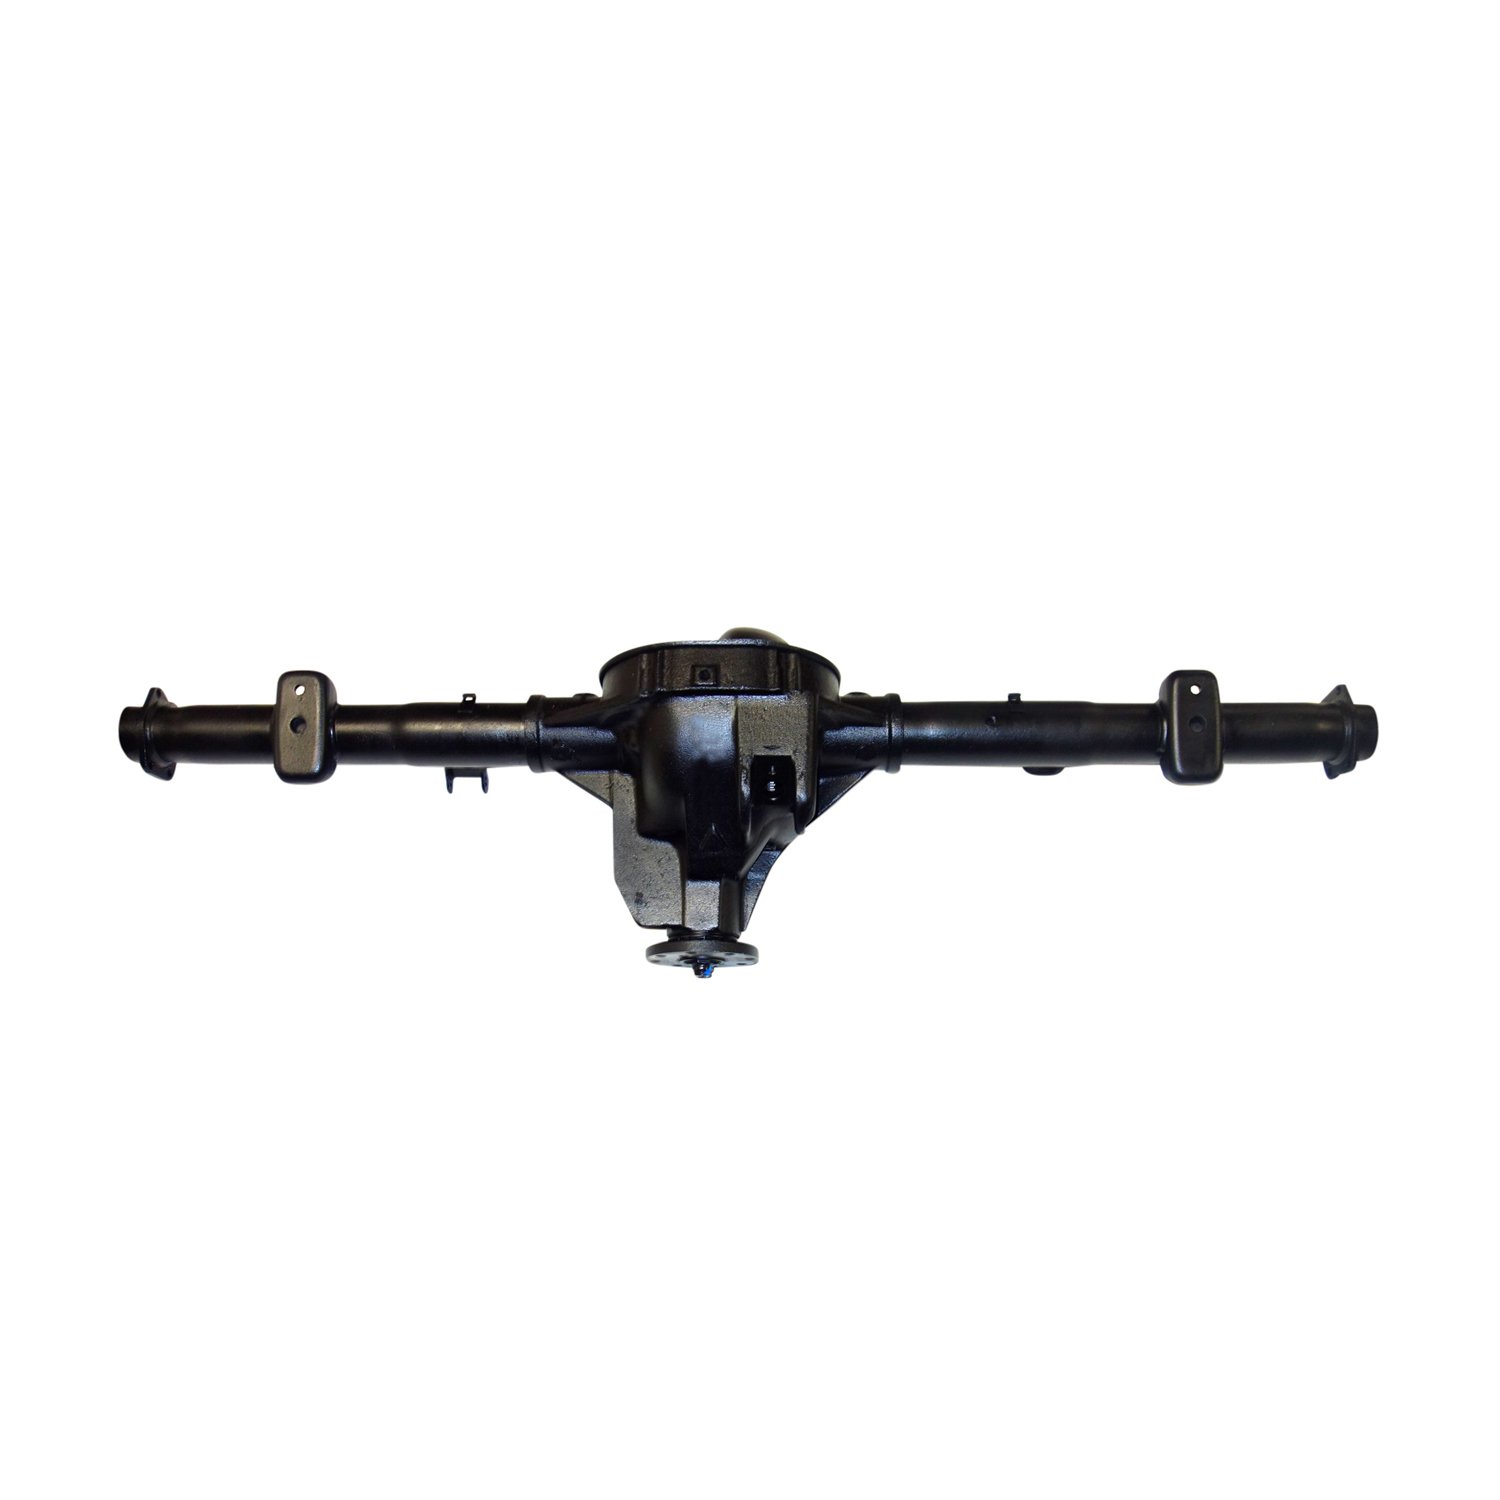 Remanufactured Axle Assy for 8.8" 91-94 & Mazda Explorer & Navajo 3.27 w/ ABS, Posi LSD